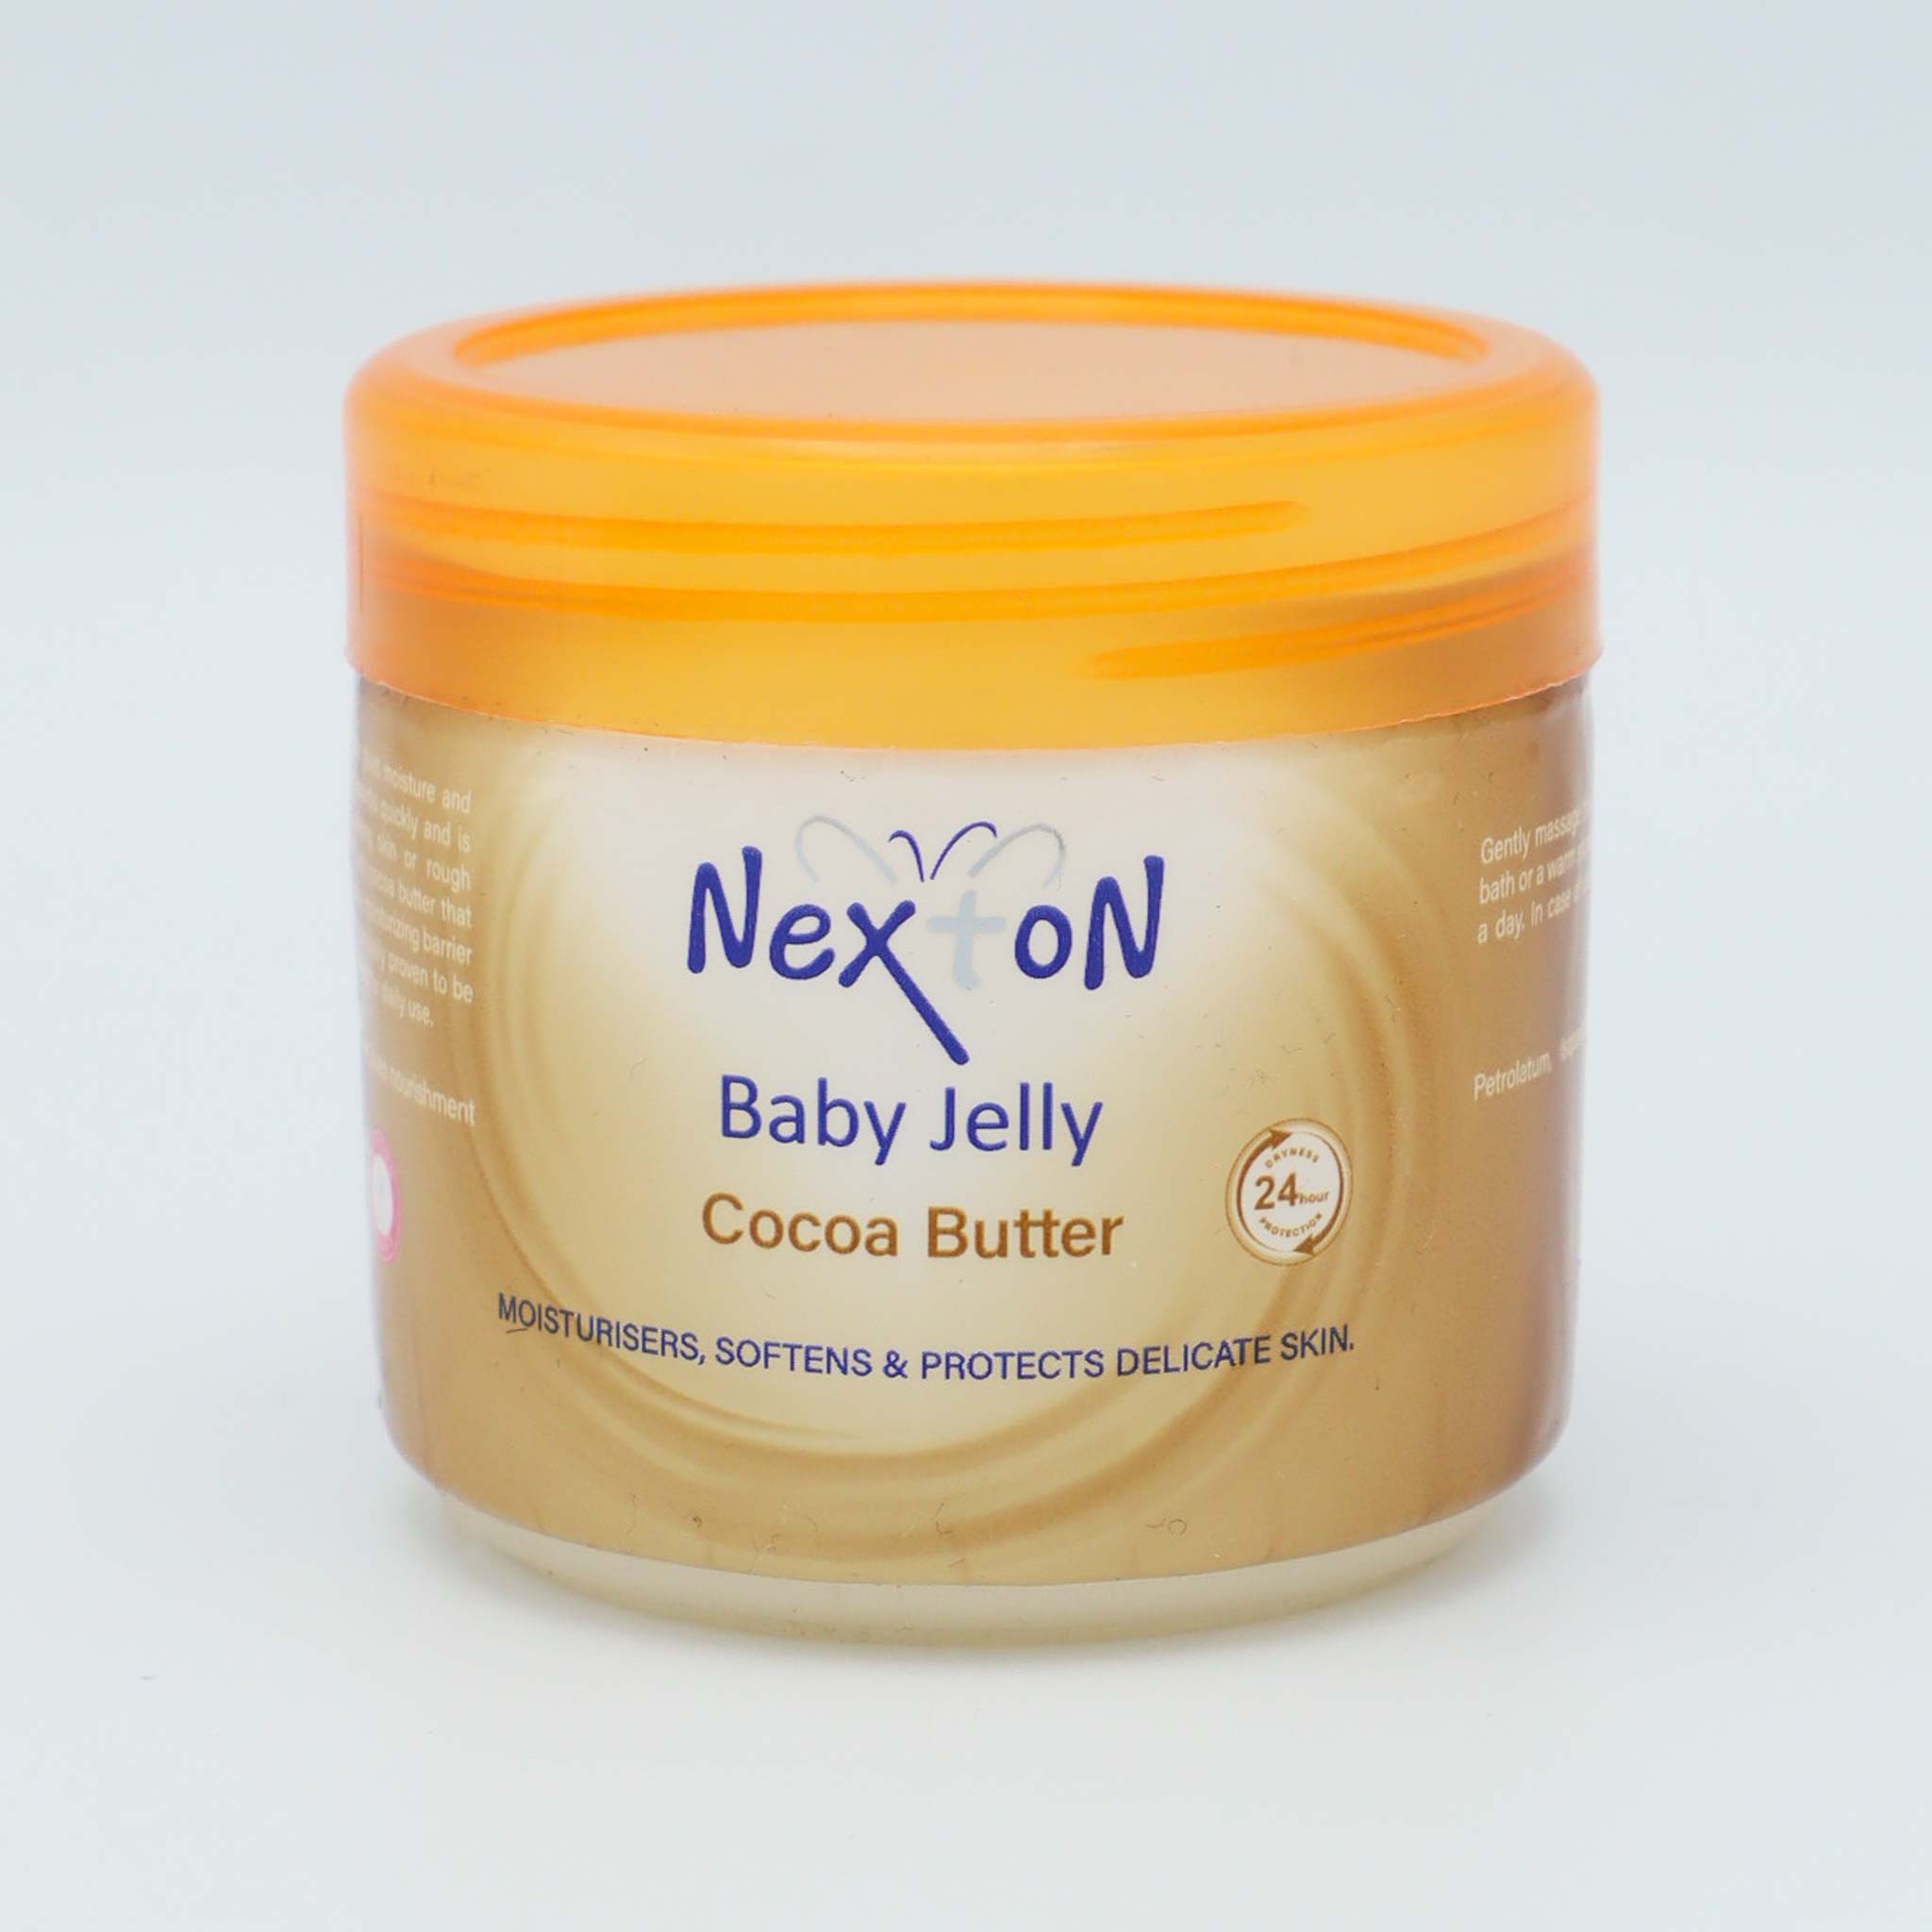 Baby jelly Cocoa Butter 100ml by Nexton